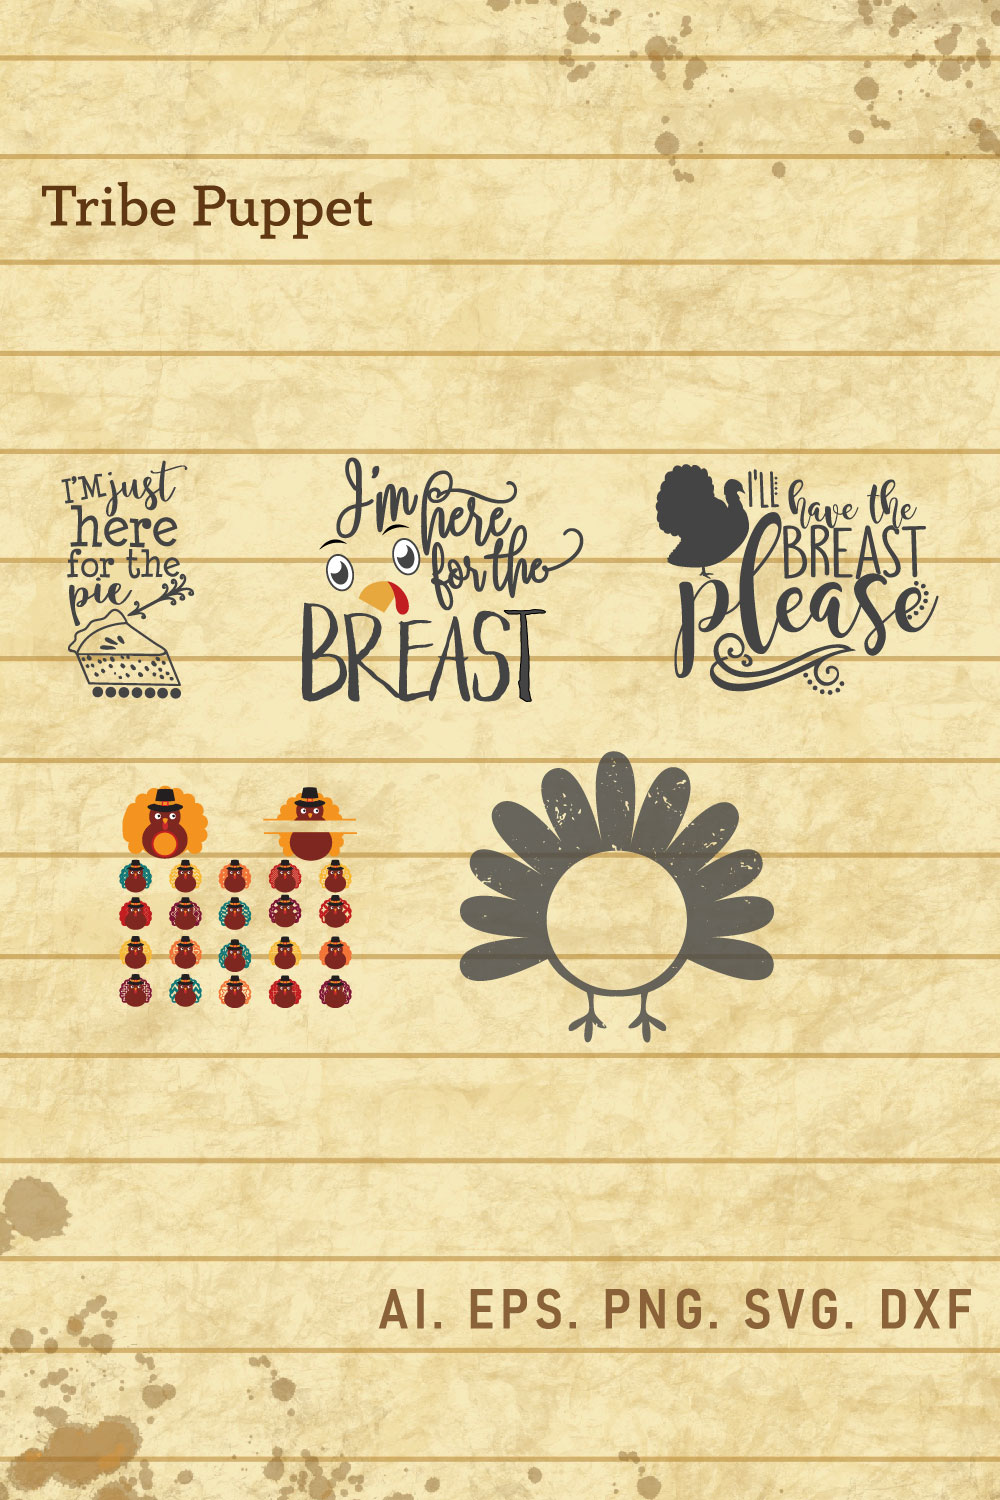 Thankxgiving Quotes 04 pinterest preview image.